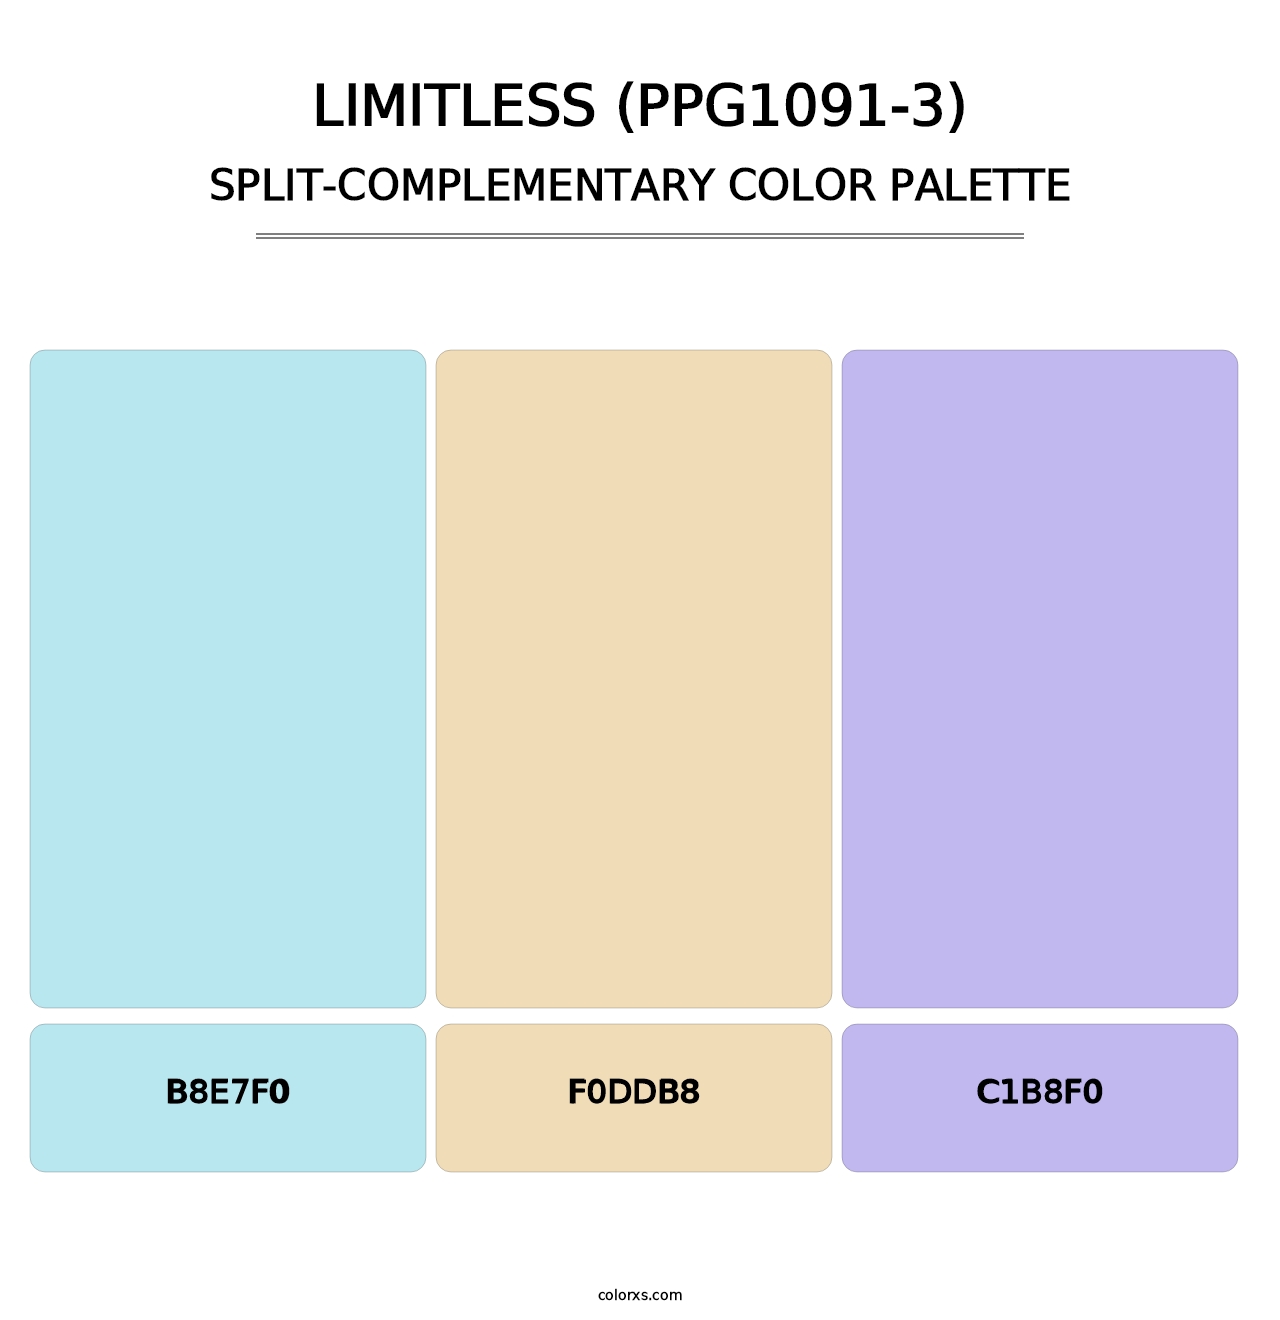 Limitless (PPG1091-3) - Split-Complementary Color Palette